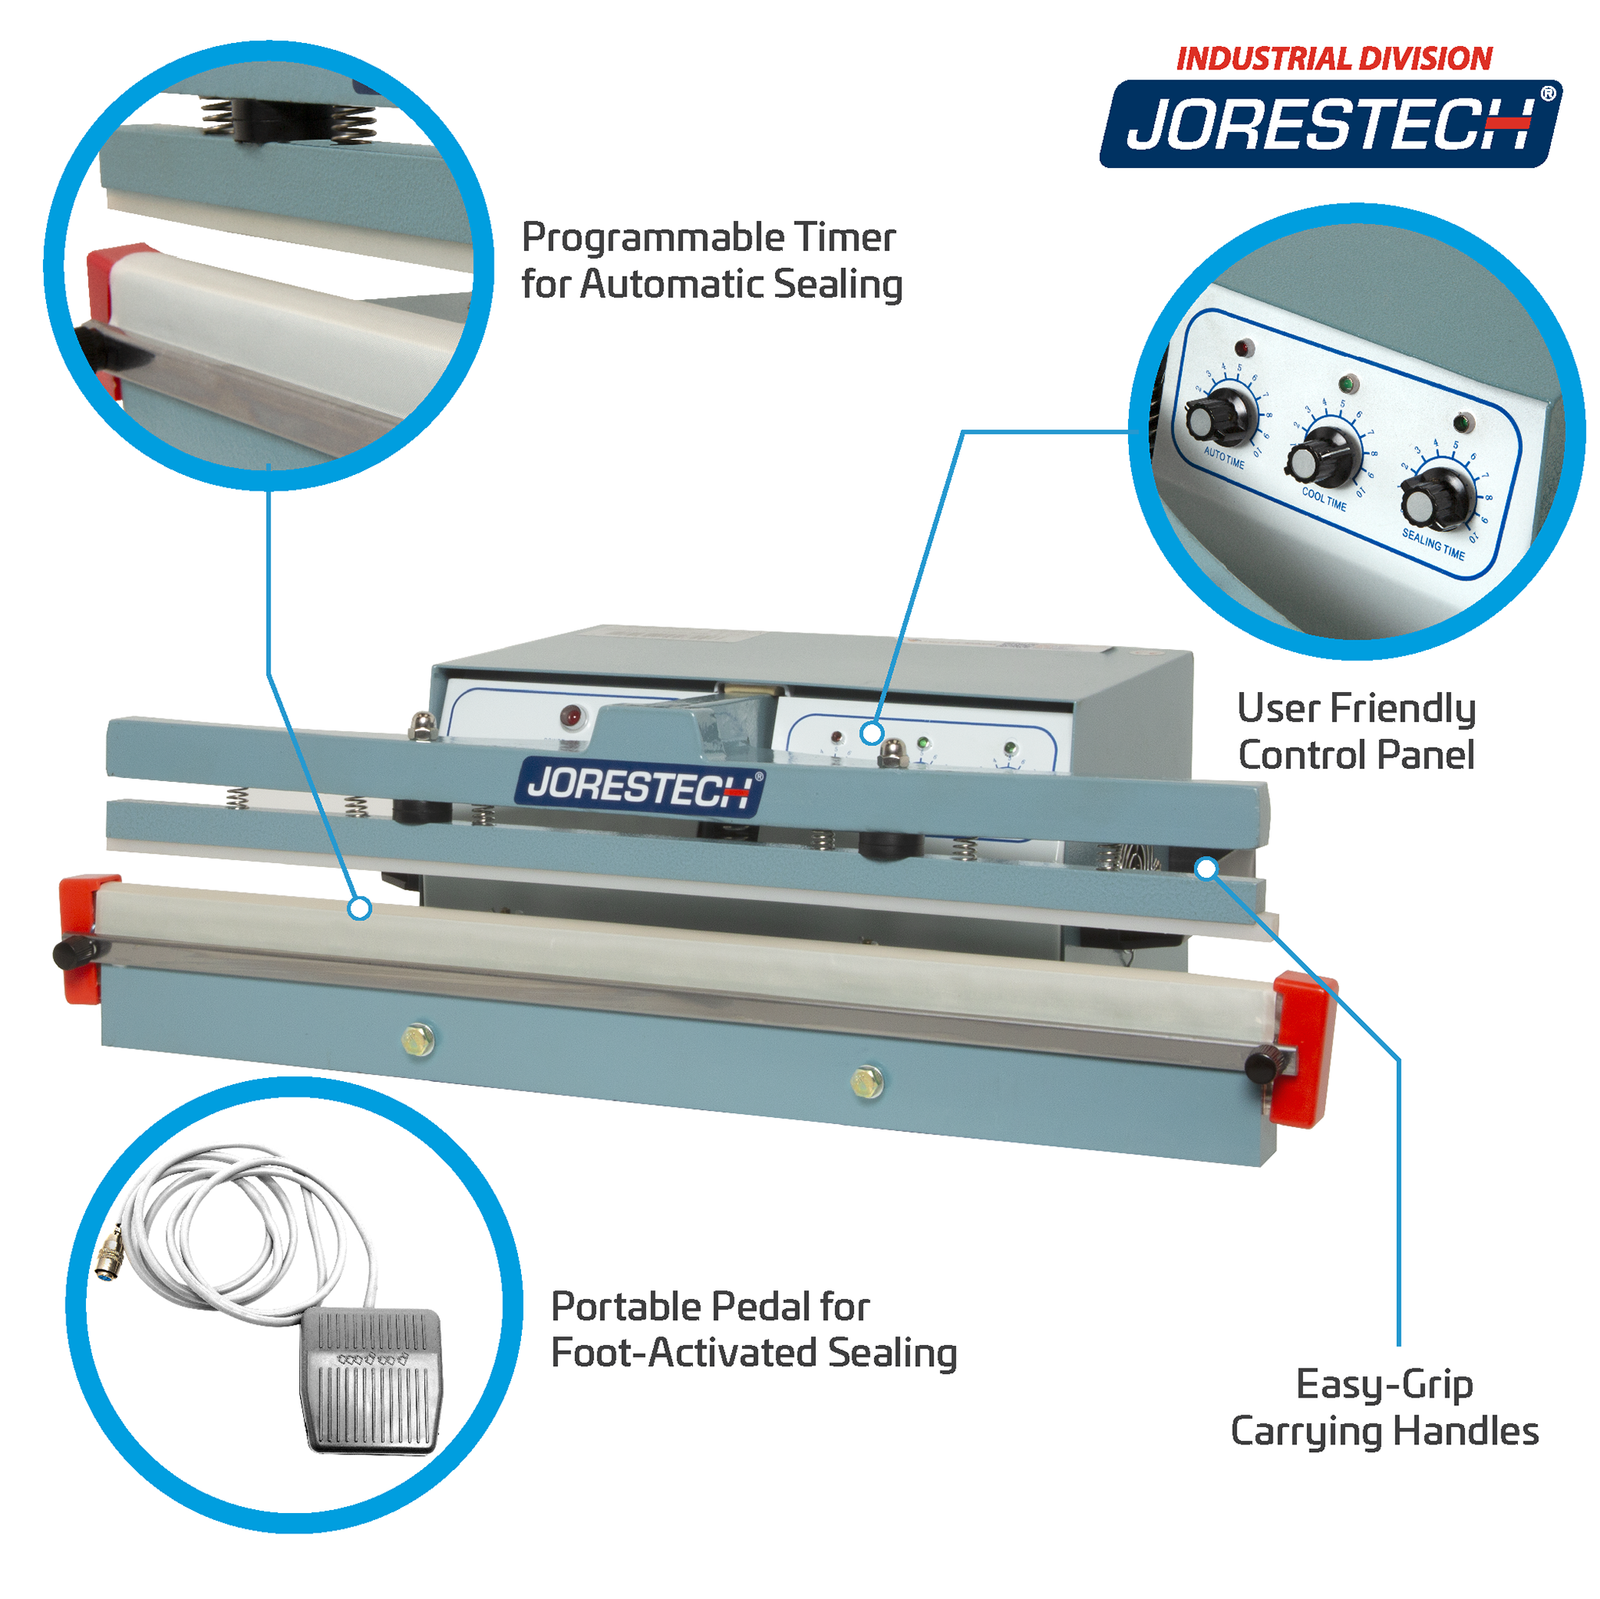 Infographic shows blue JORESTECH foot impulse bag sealer over white background. Highlighted features include, Programmable Timer for Automatic Sealing, User Friendly Control Panel, Portable Pedal for Foot-Activated Sealing, and Easy-Grip carrying handles. Close-ups of sealing element, foot pedal, and control panel.